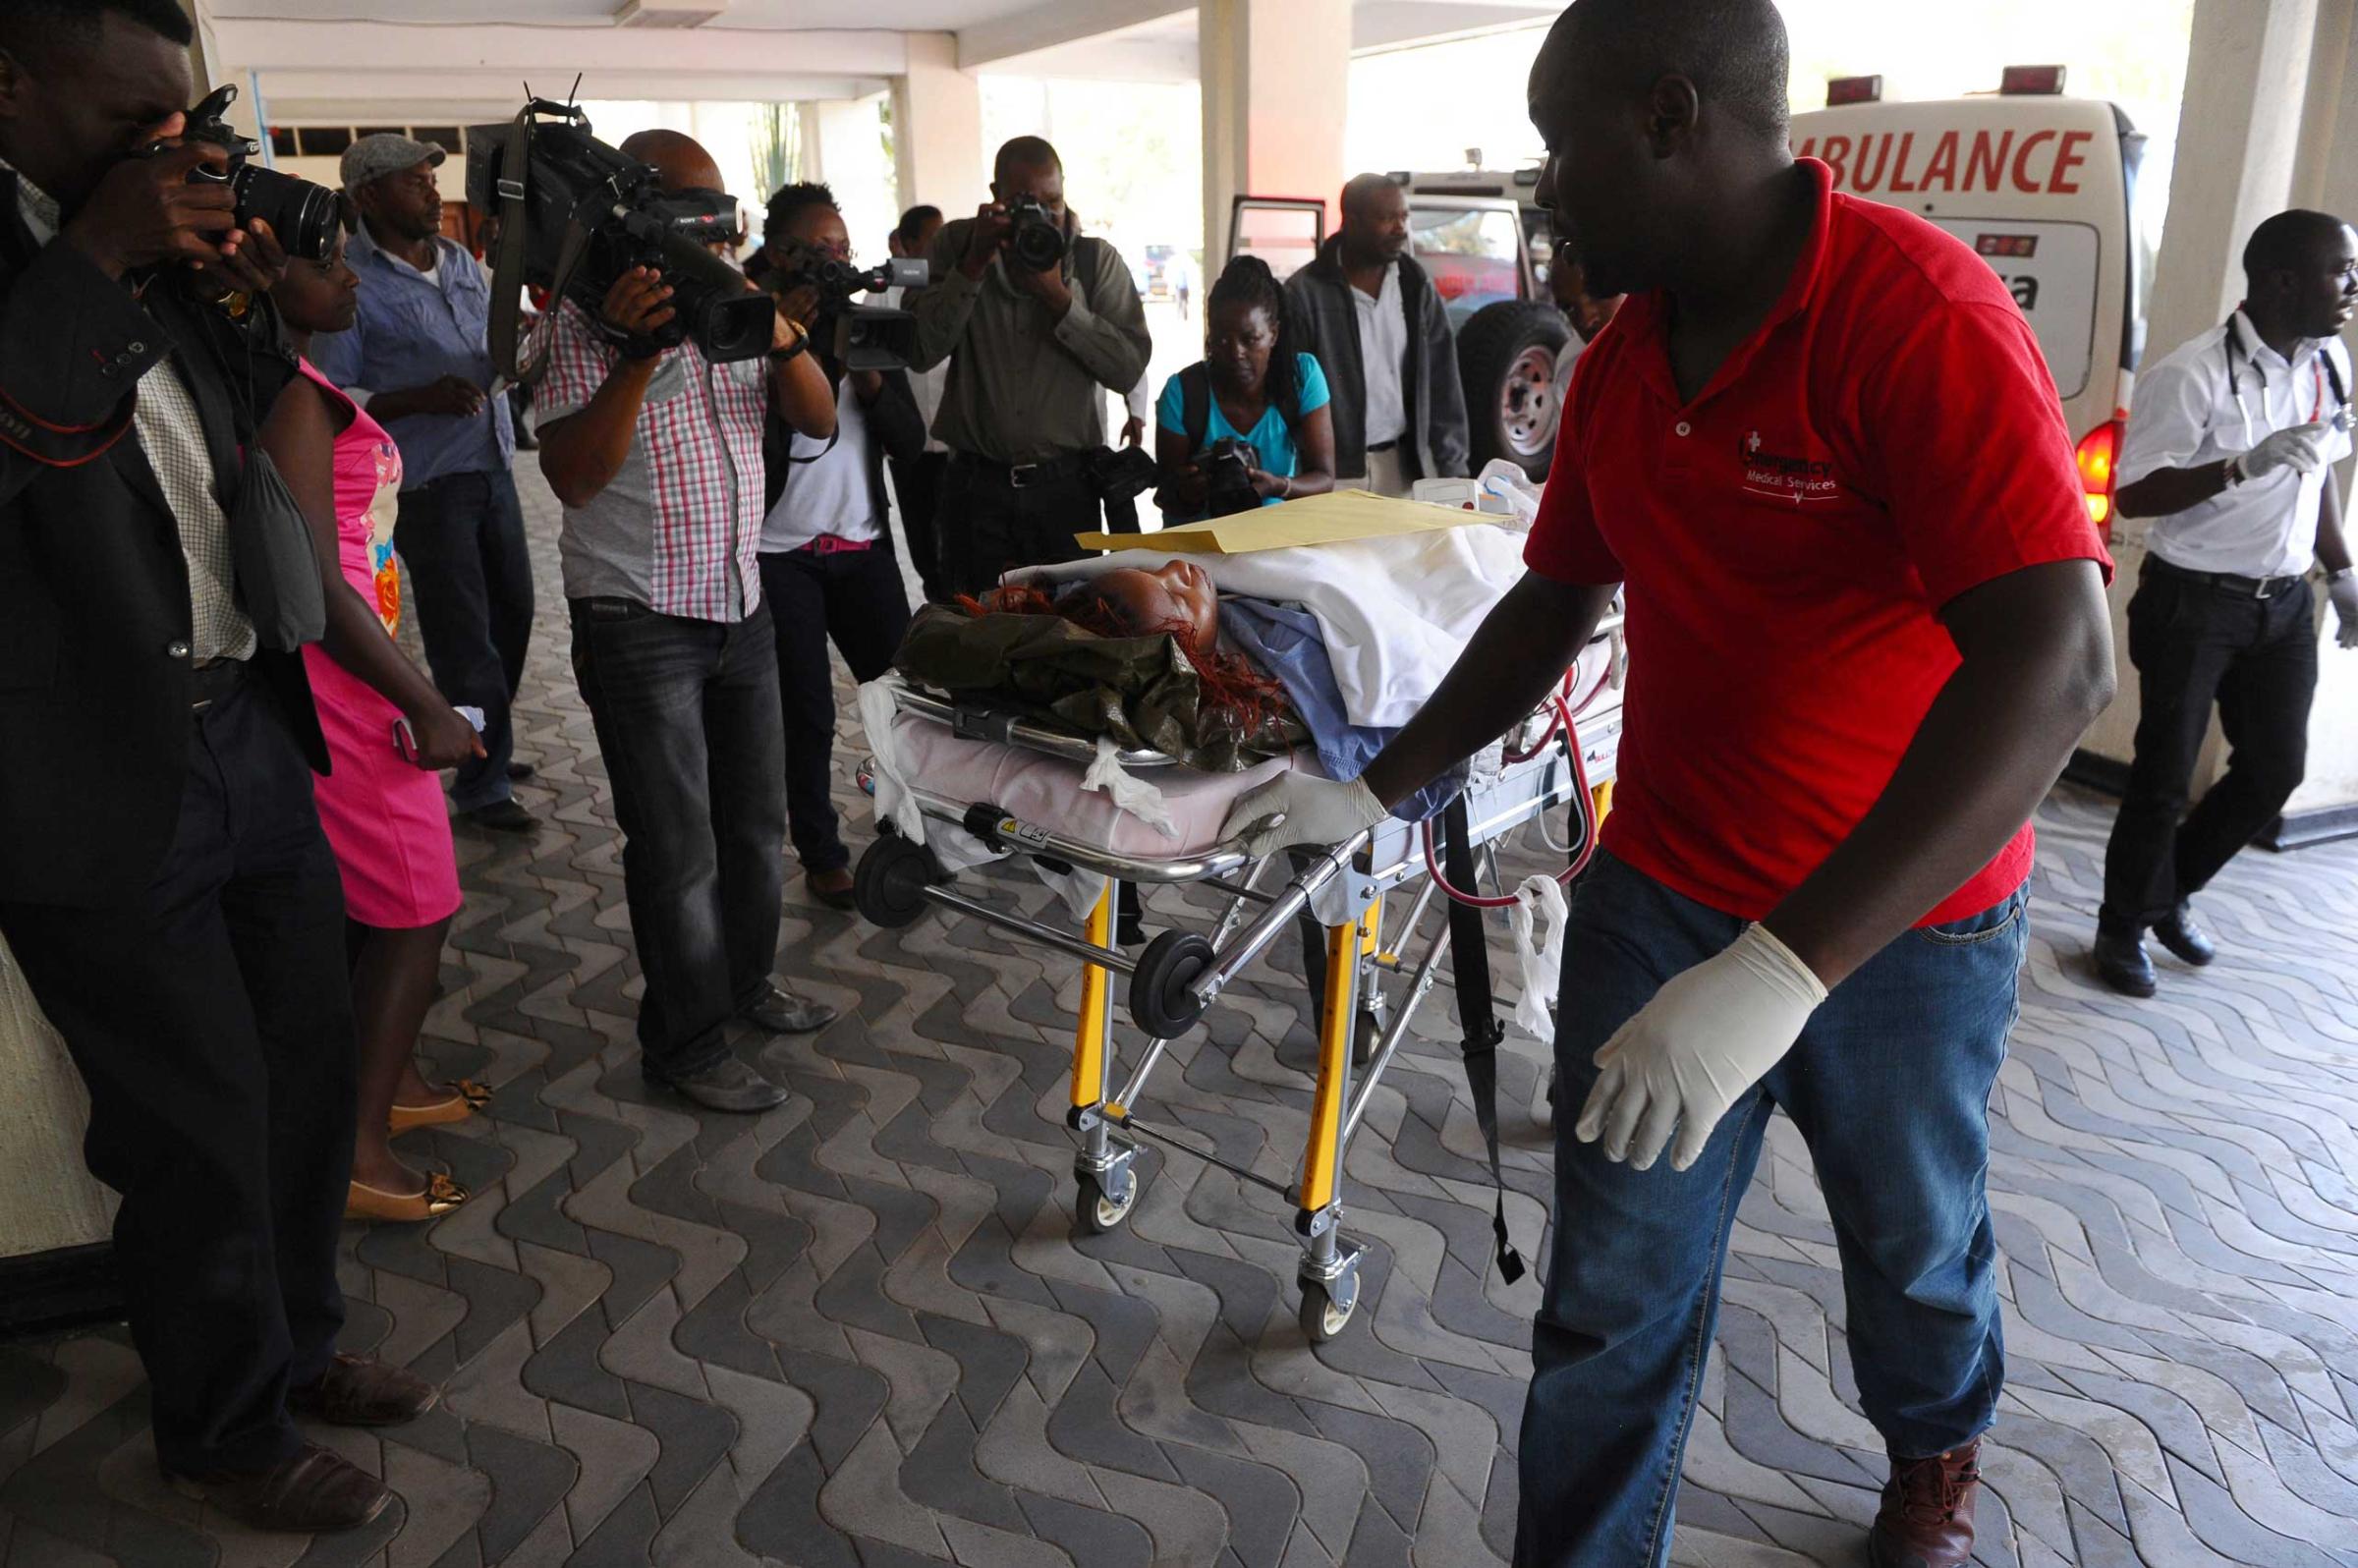 Medics help an injured person at Kenyatta National Hospital in Nairobi after being airlifted from the site of an attack at Garissa University College, in northeastern Kenya, on April 2, 2015.